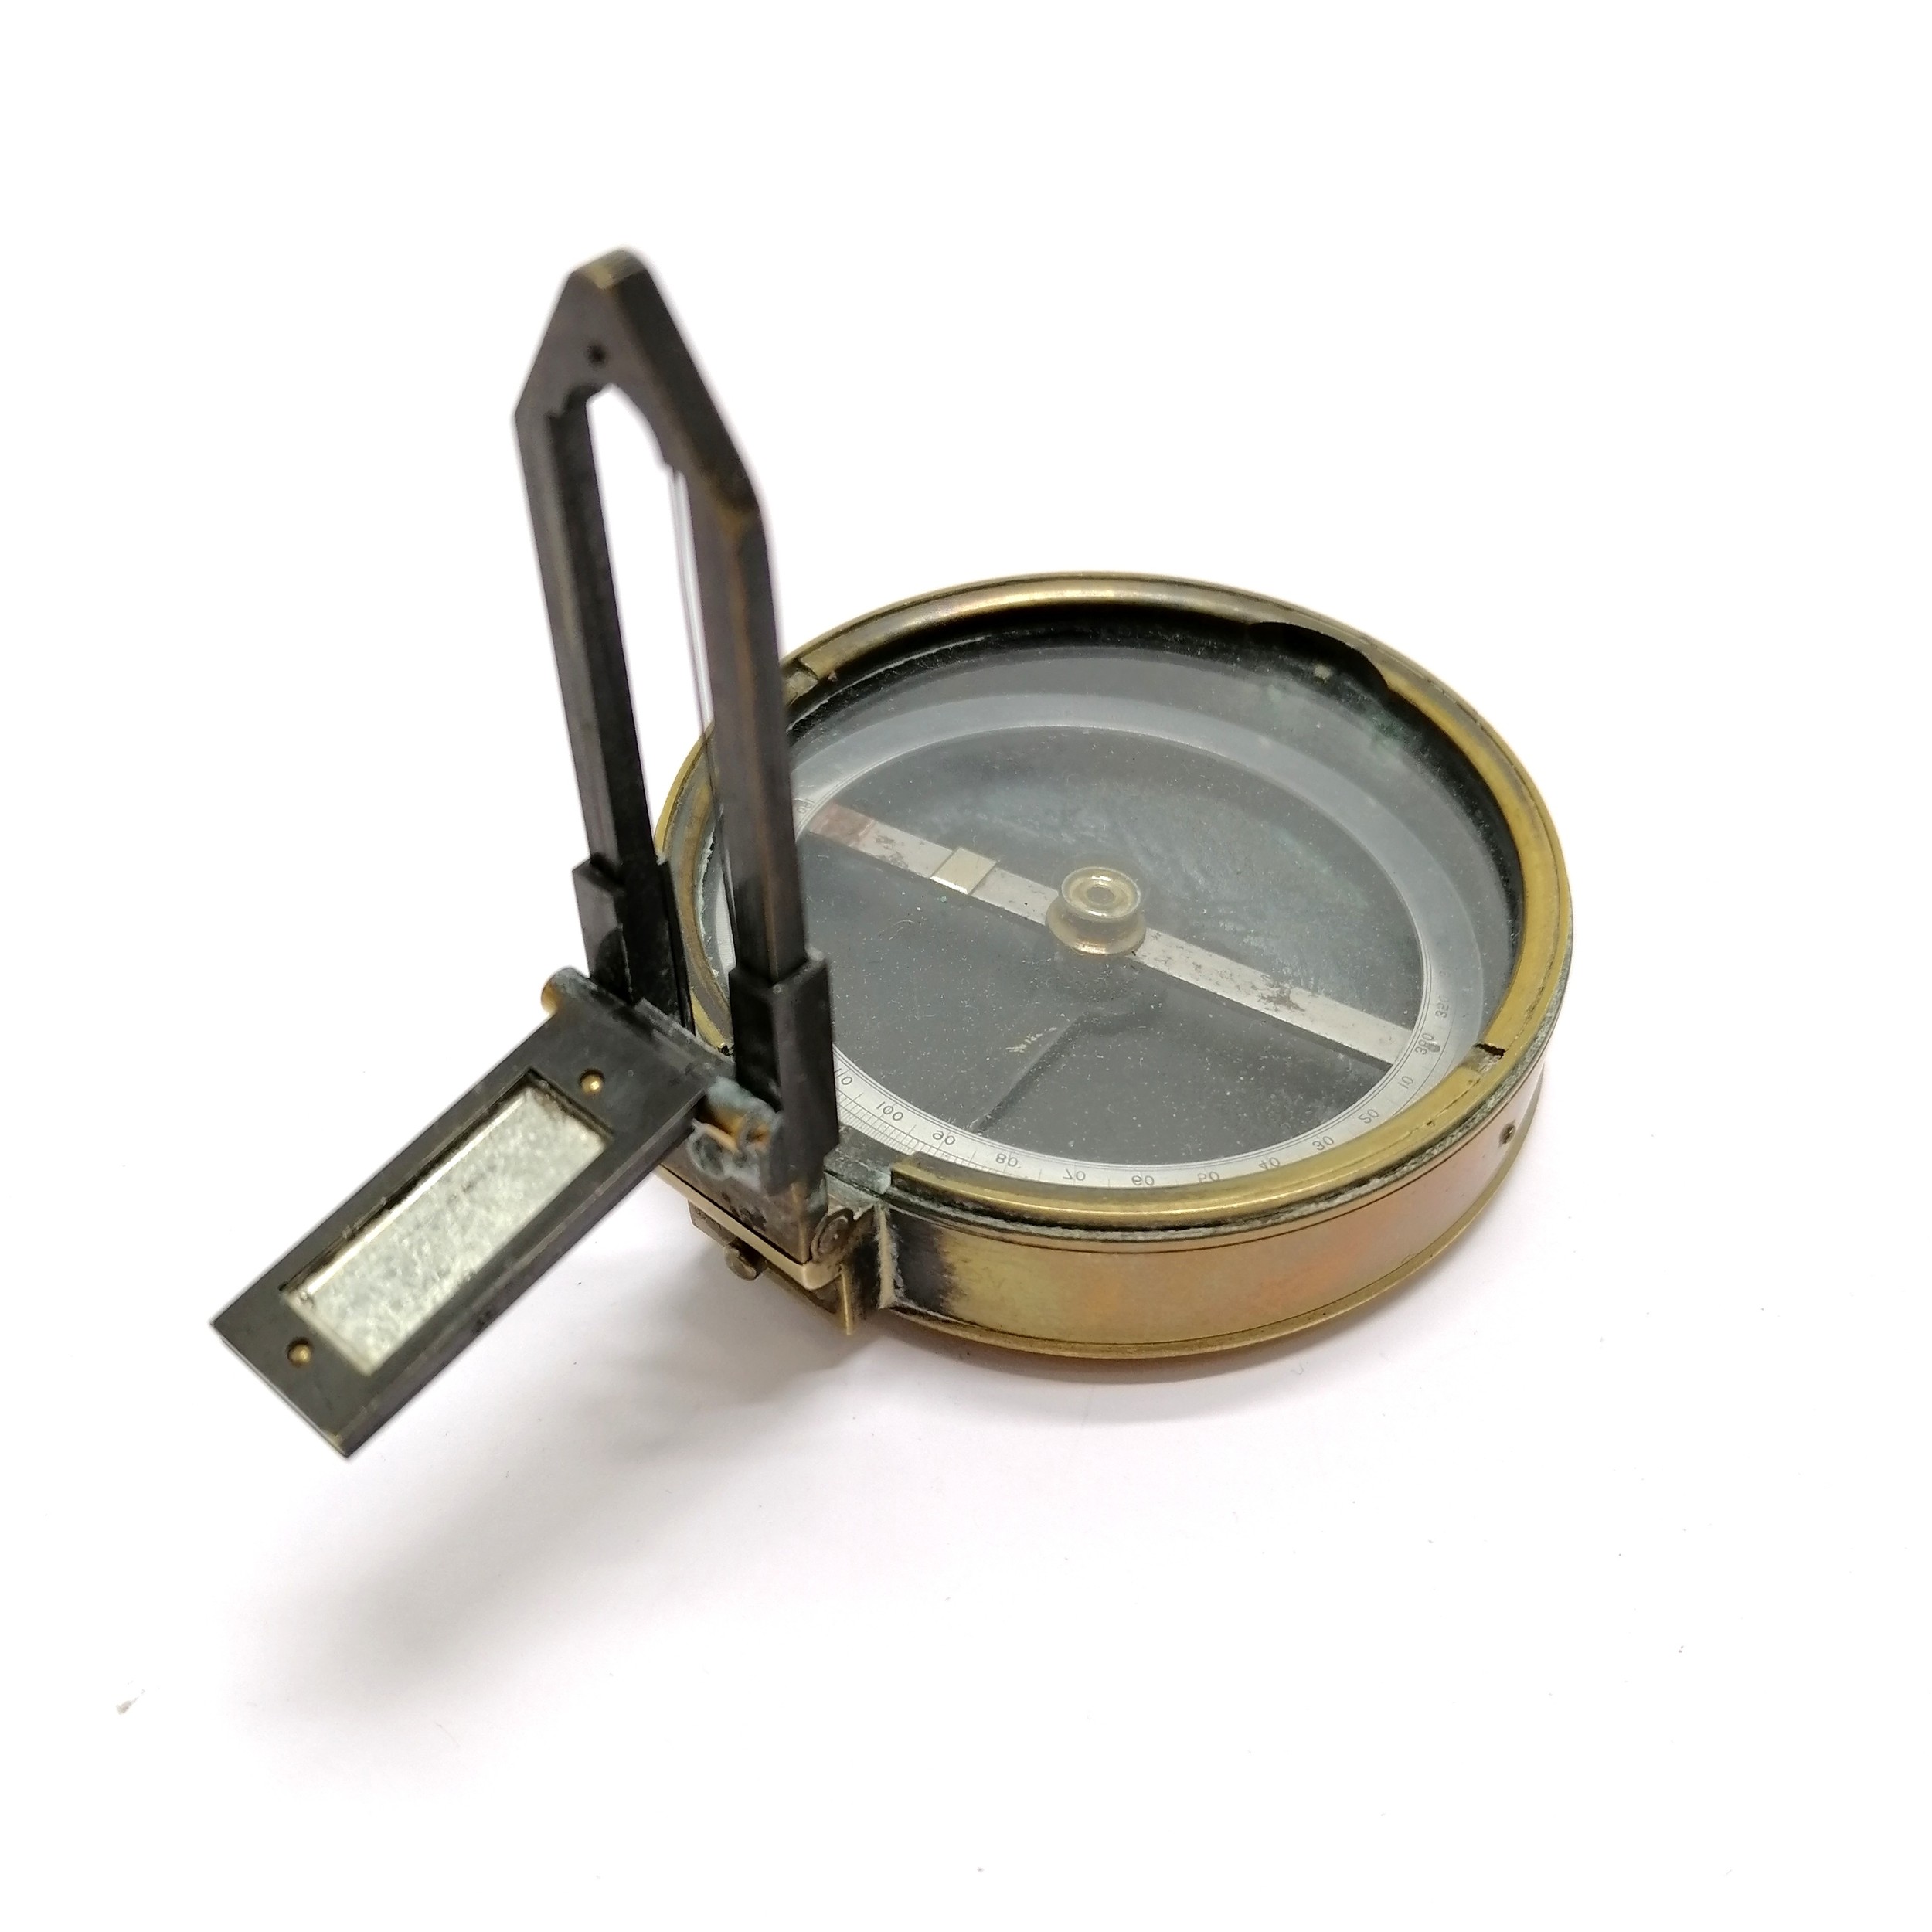 Antique prismatic compass (7.4cm diameter & missing lens) retailed by Hirsbrunner & Co (Tientsin) in - Image 2 of 5